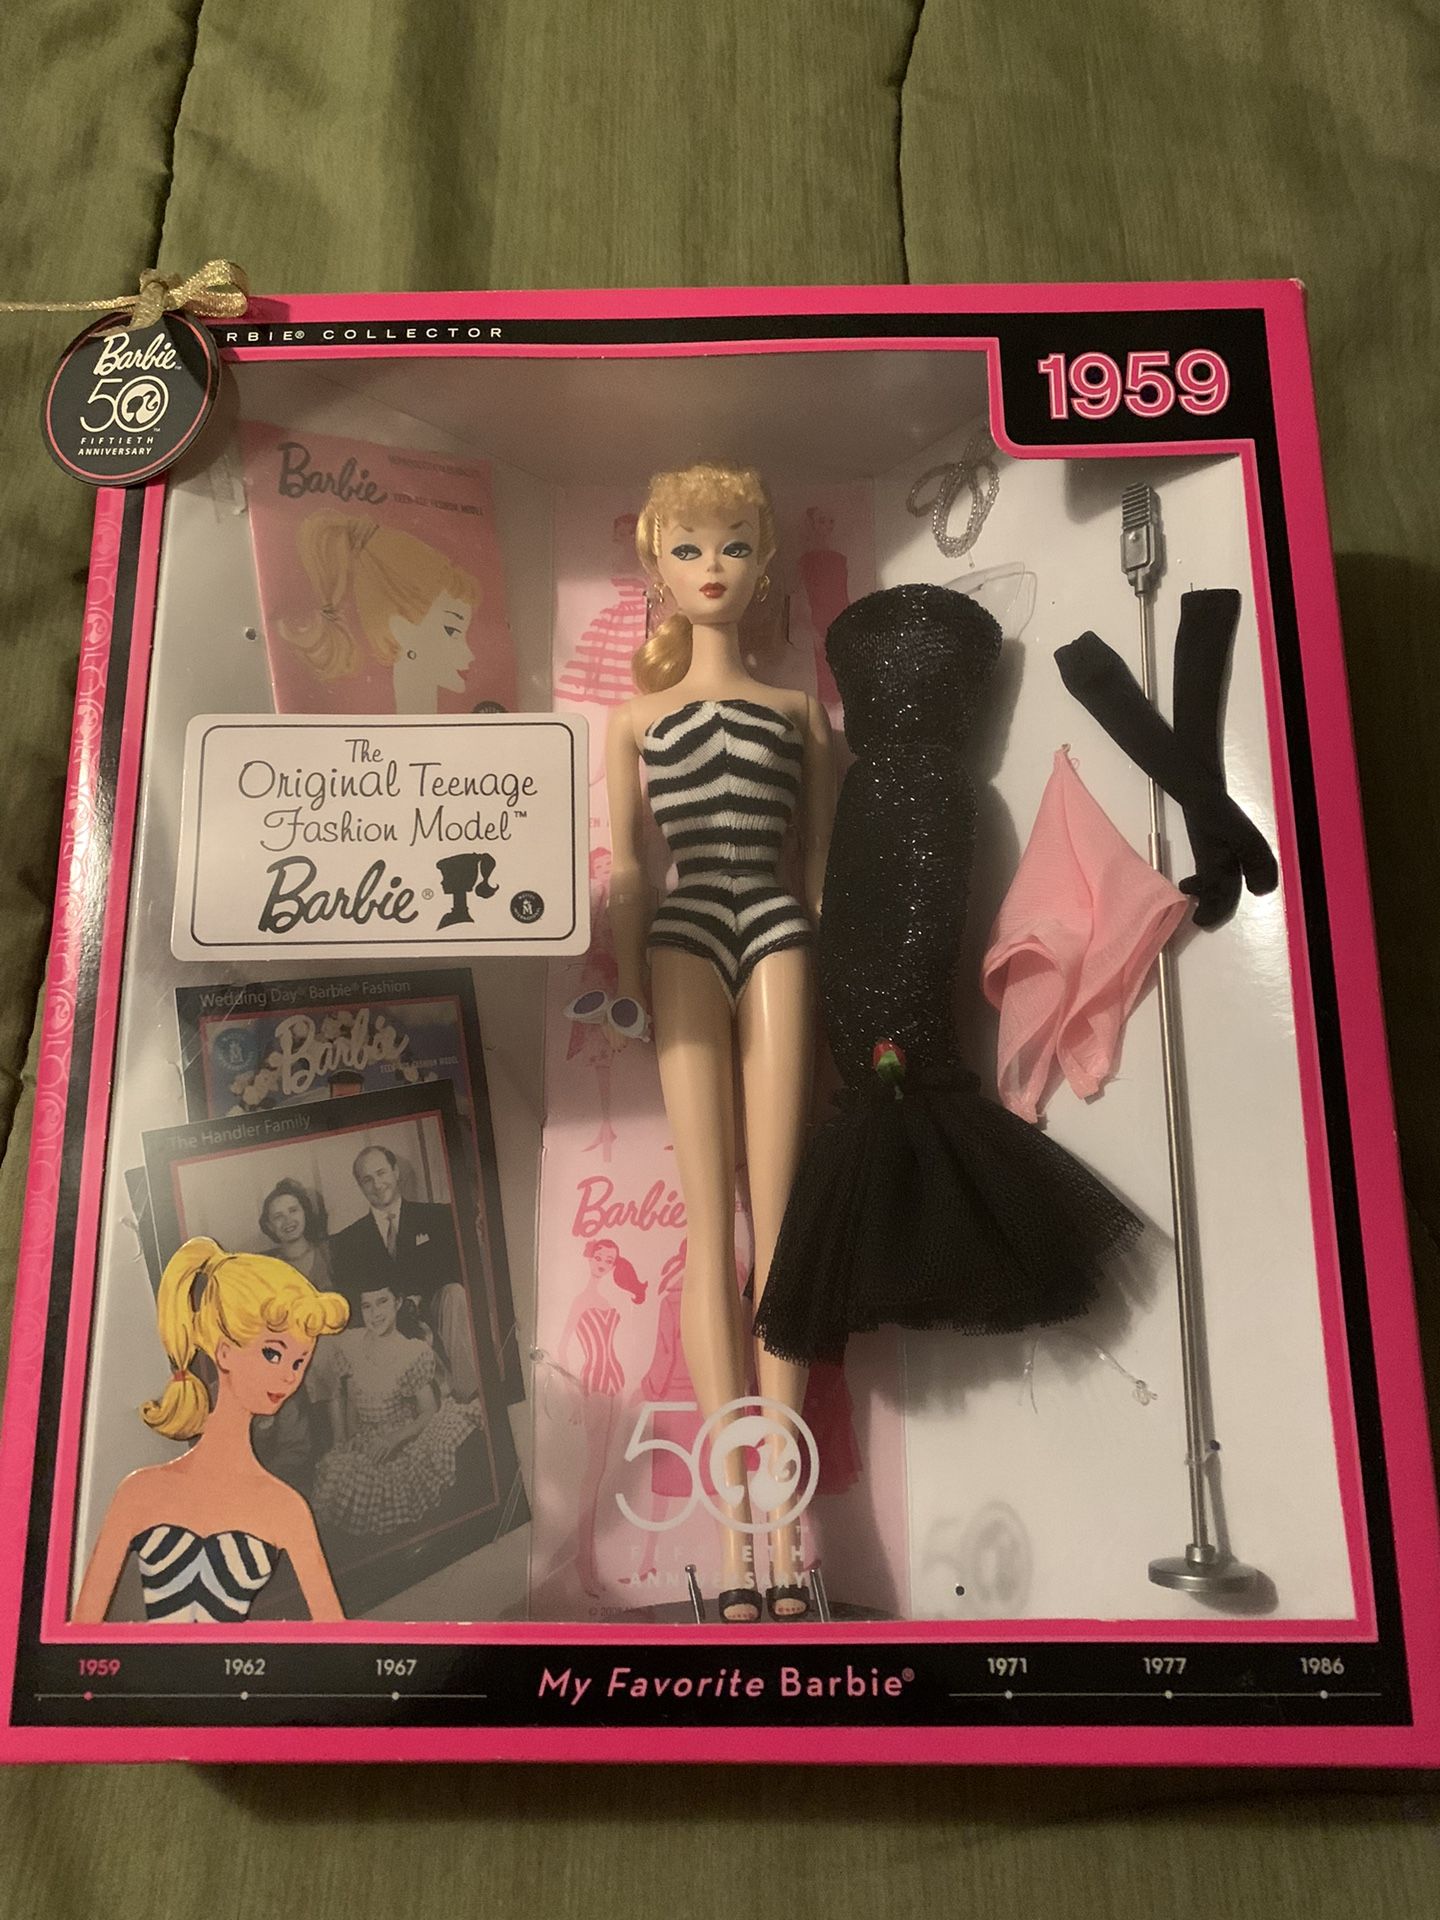 50 Years Of Barbie 2009-1959 Collectors Edition 